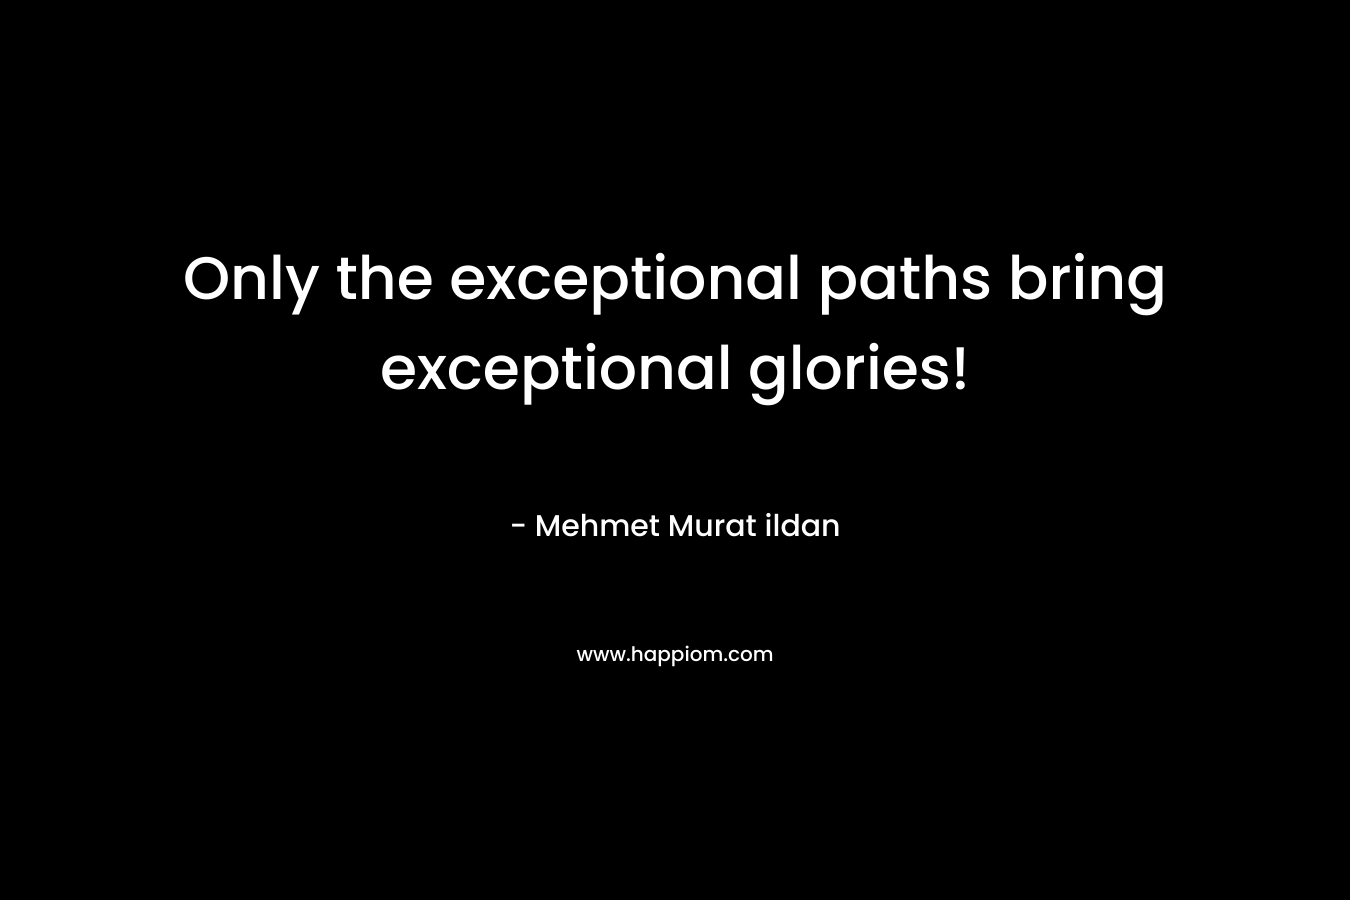 Only the exceptional paths bring exceptional glories!